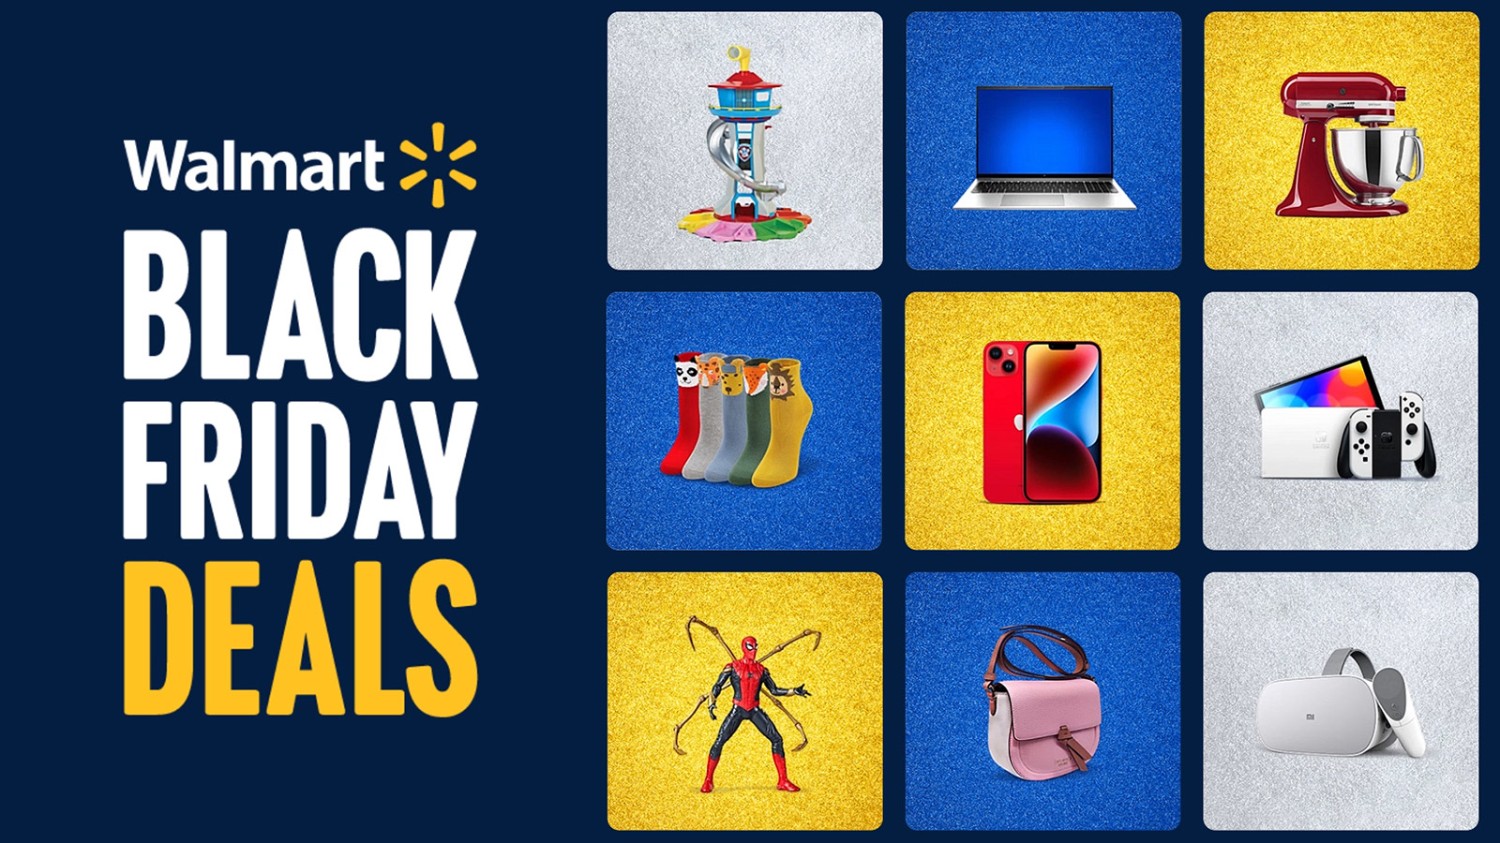 Walmart’s “Black Friday Deals” Are Back With Major Savings and Early